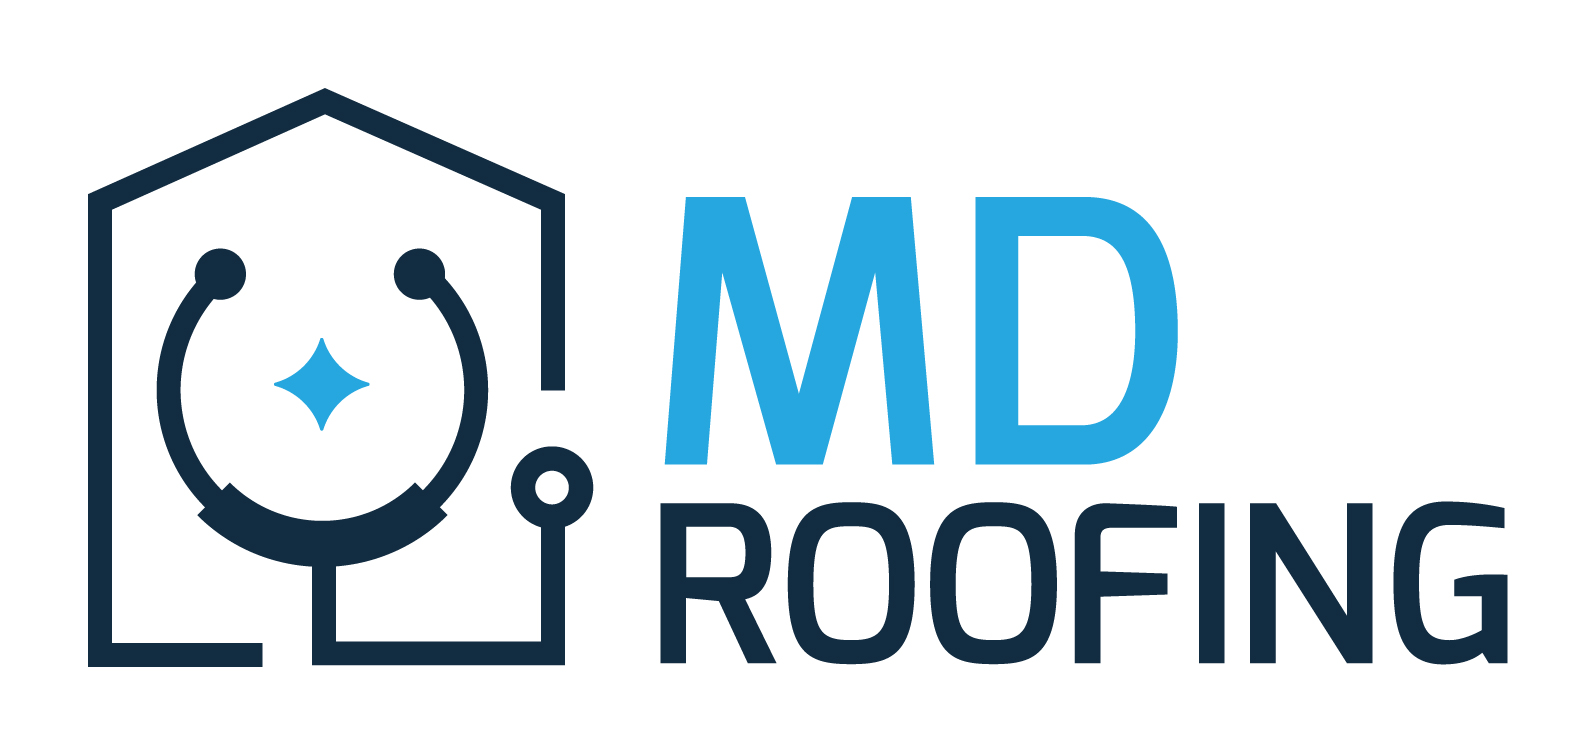 MD Roofing Logo